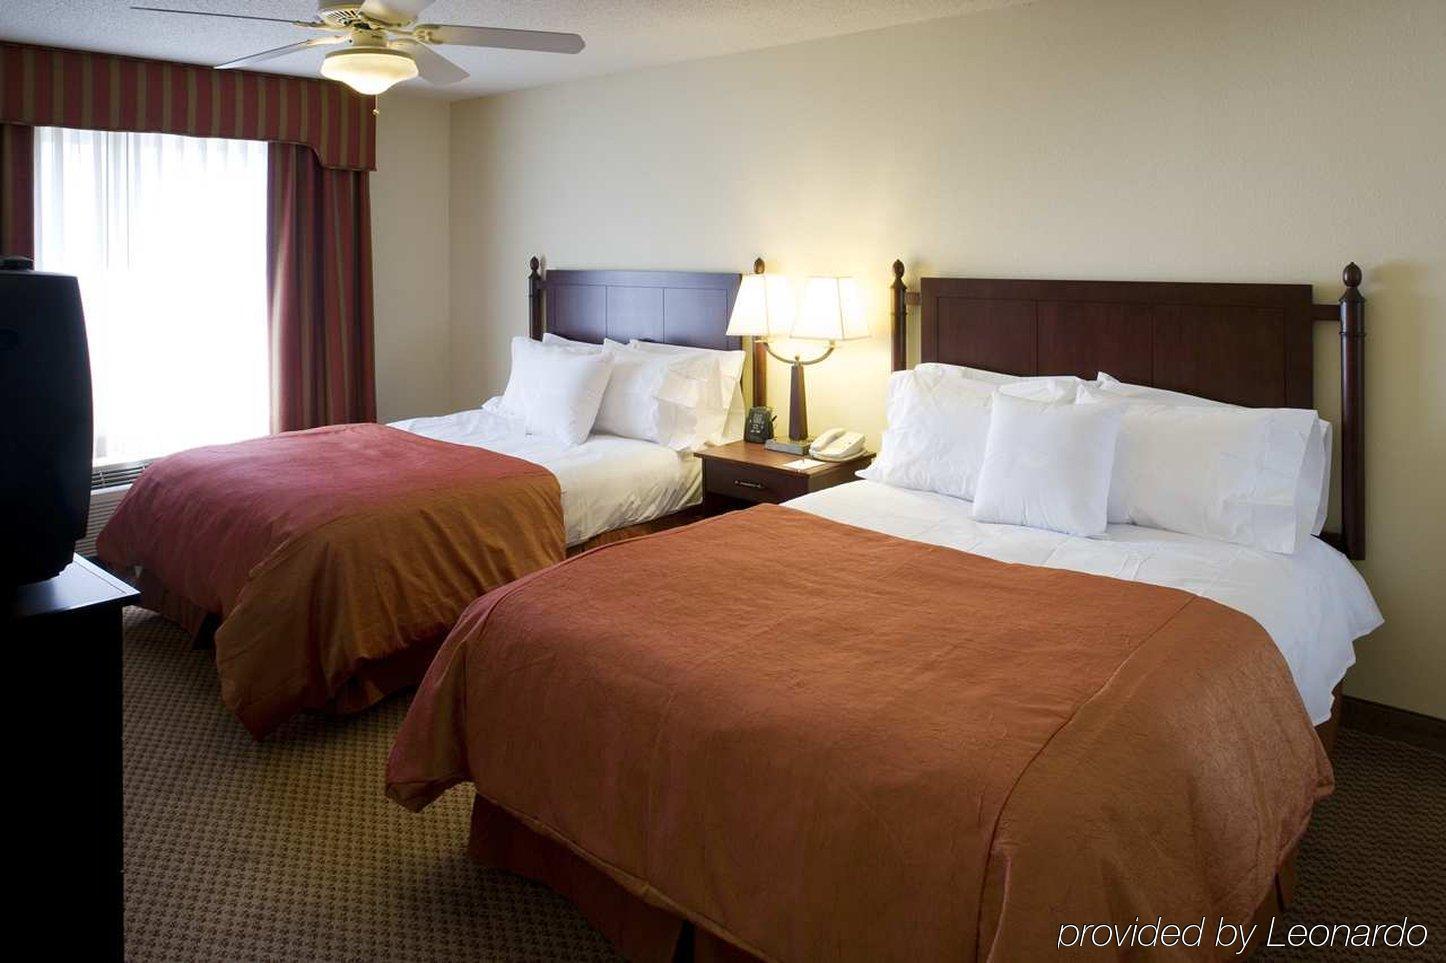 Homewood Suites By Hilton Somerset Room photo